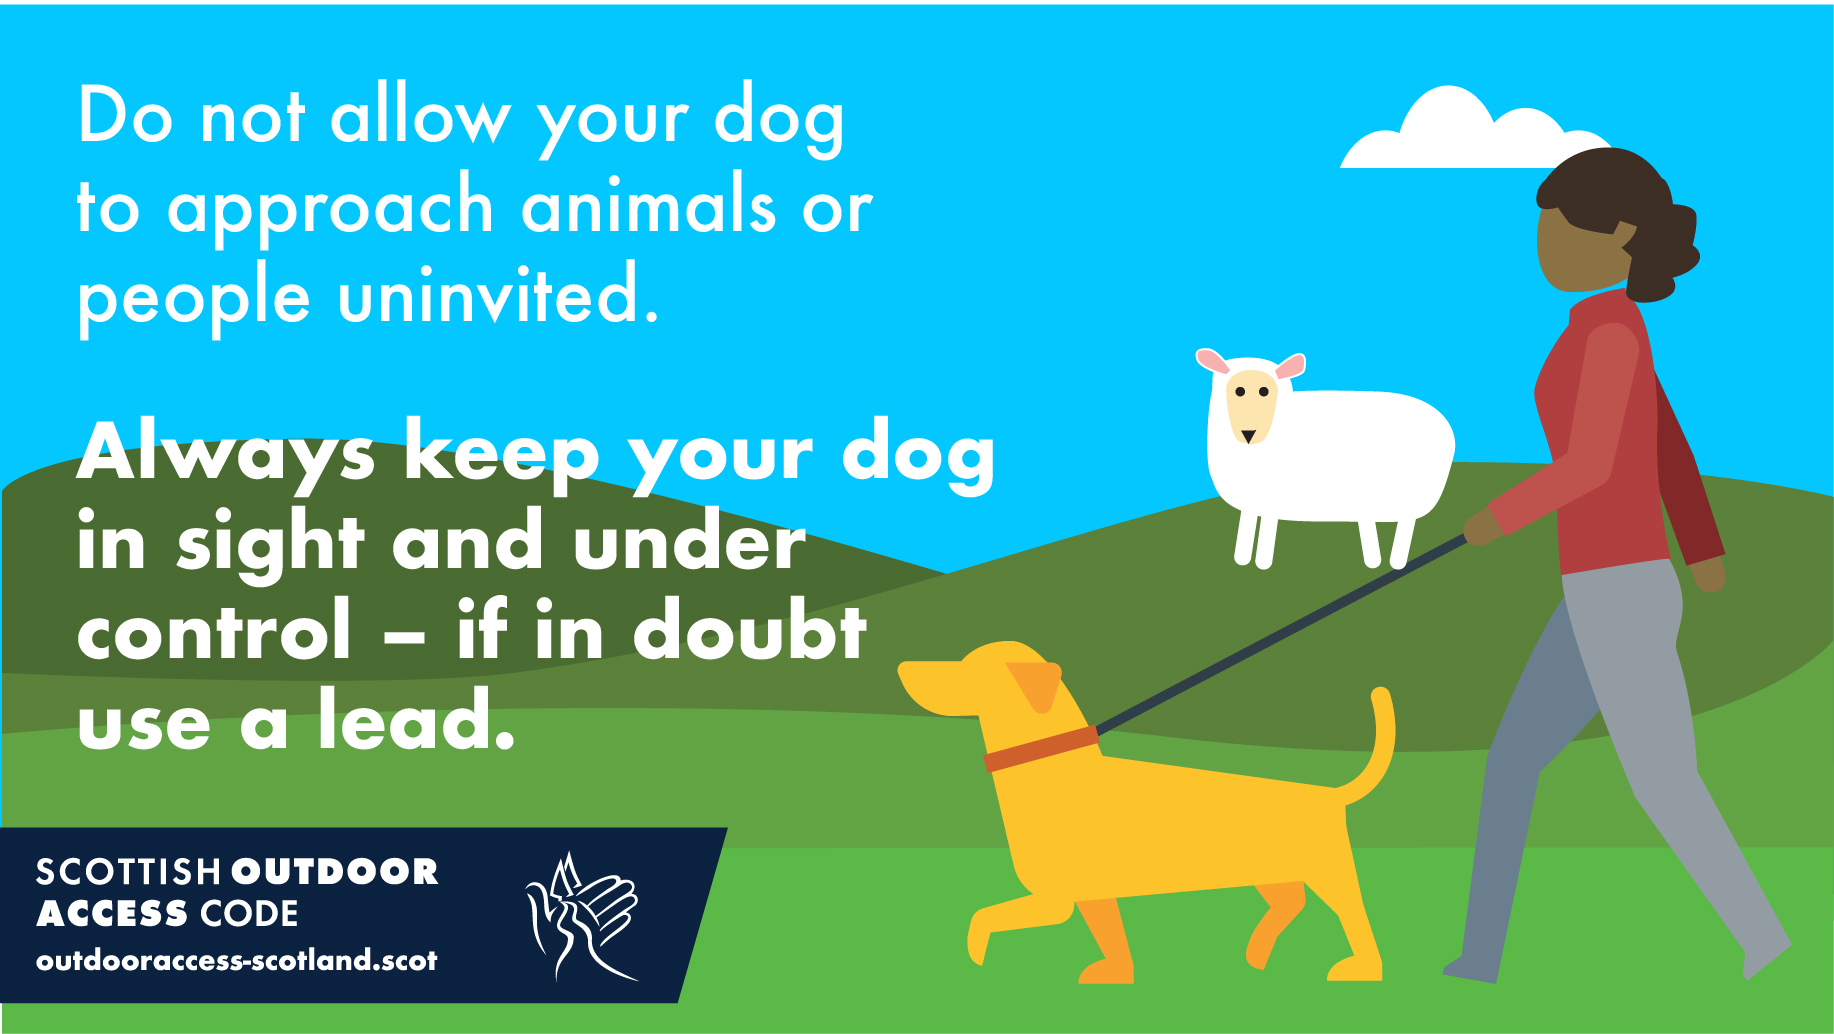 Don't allow your dog to approach animals or people uninvited. Always keep your dog in sight and under control. If in doubt use a lead...